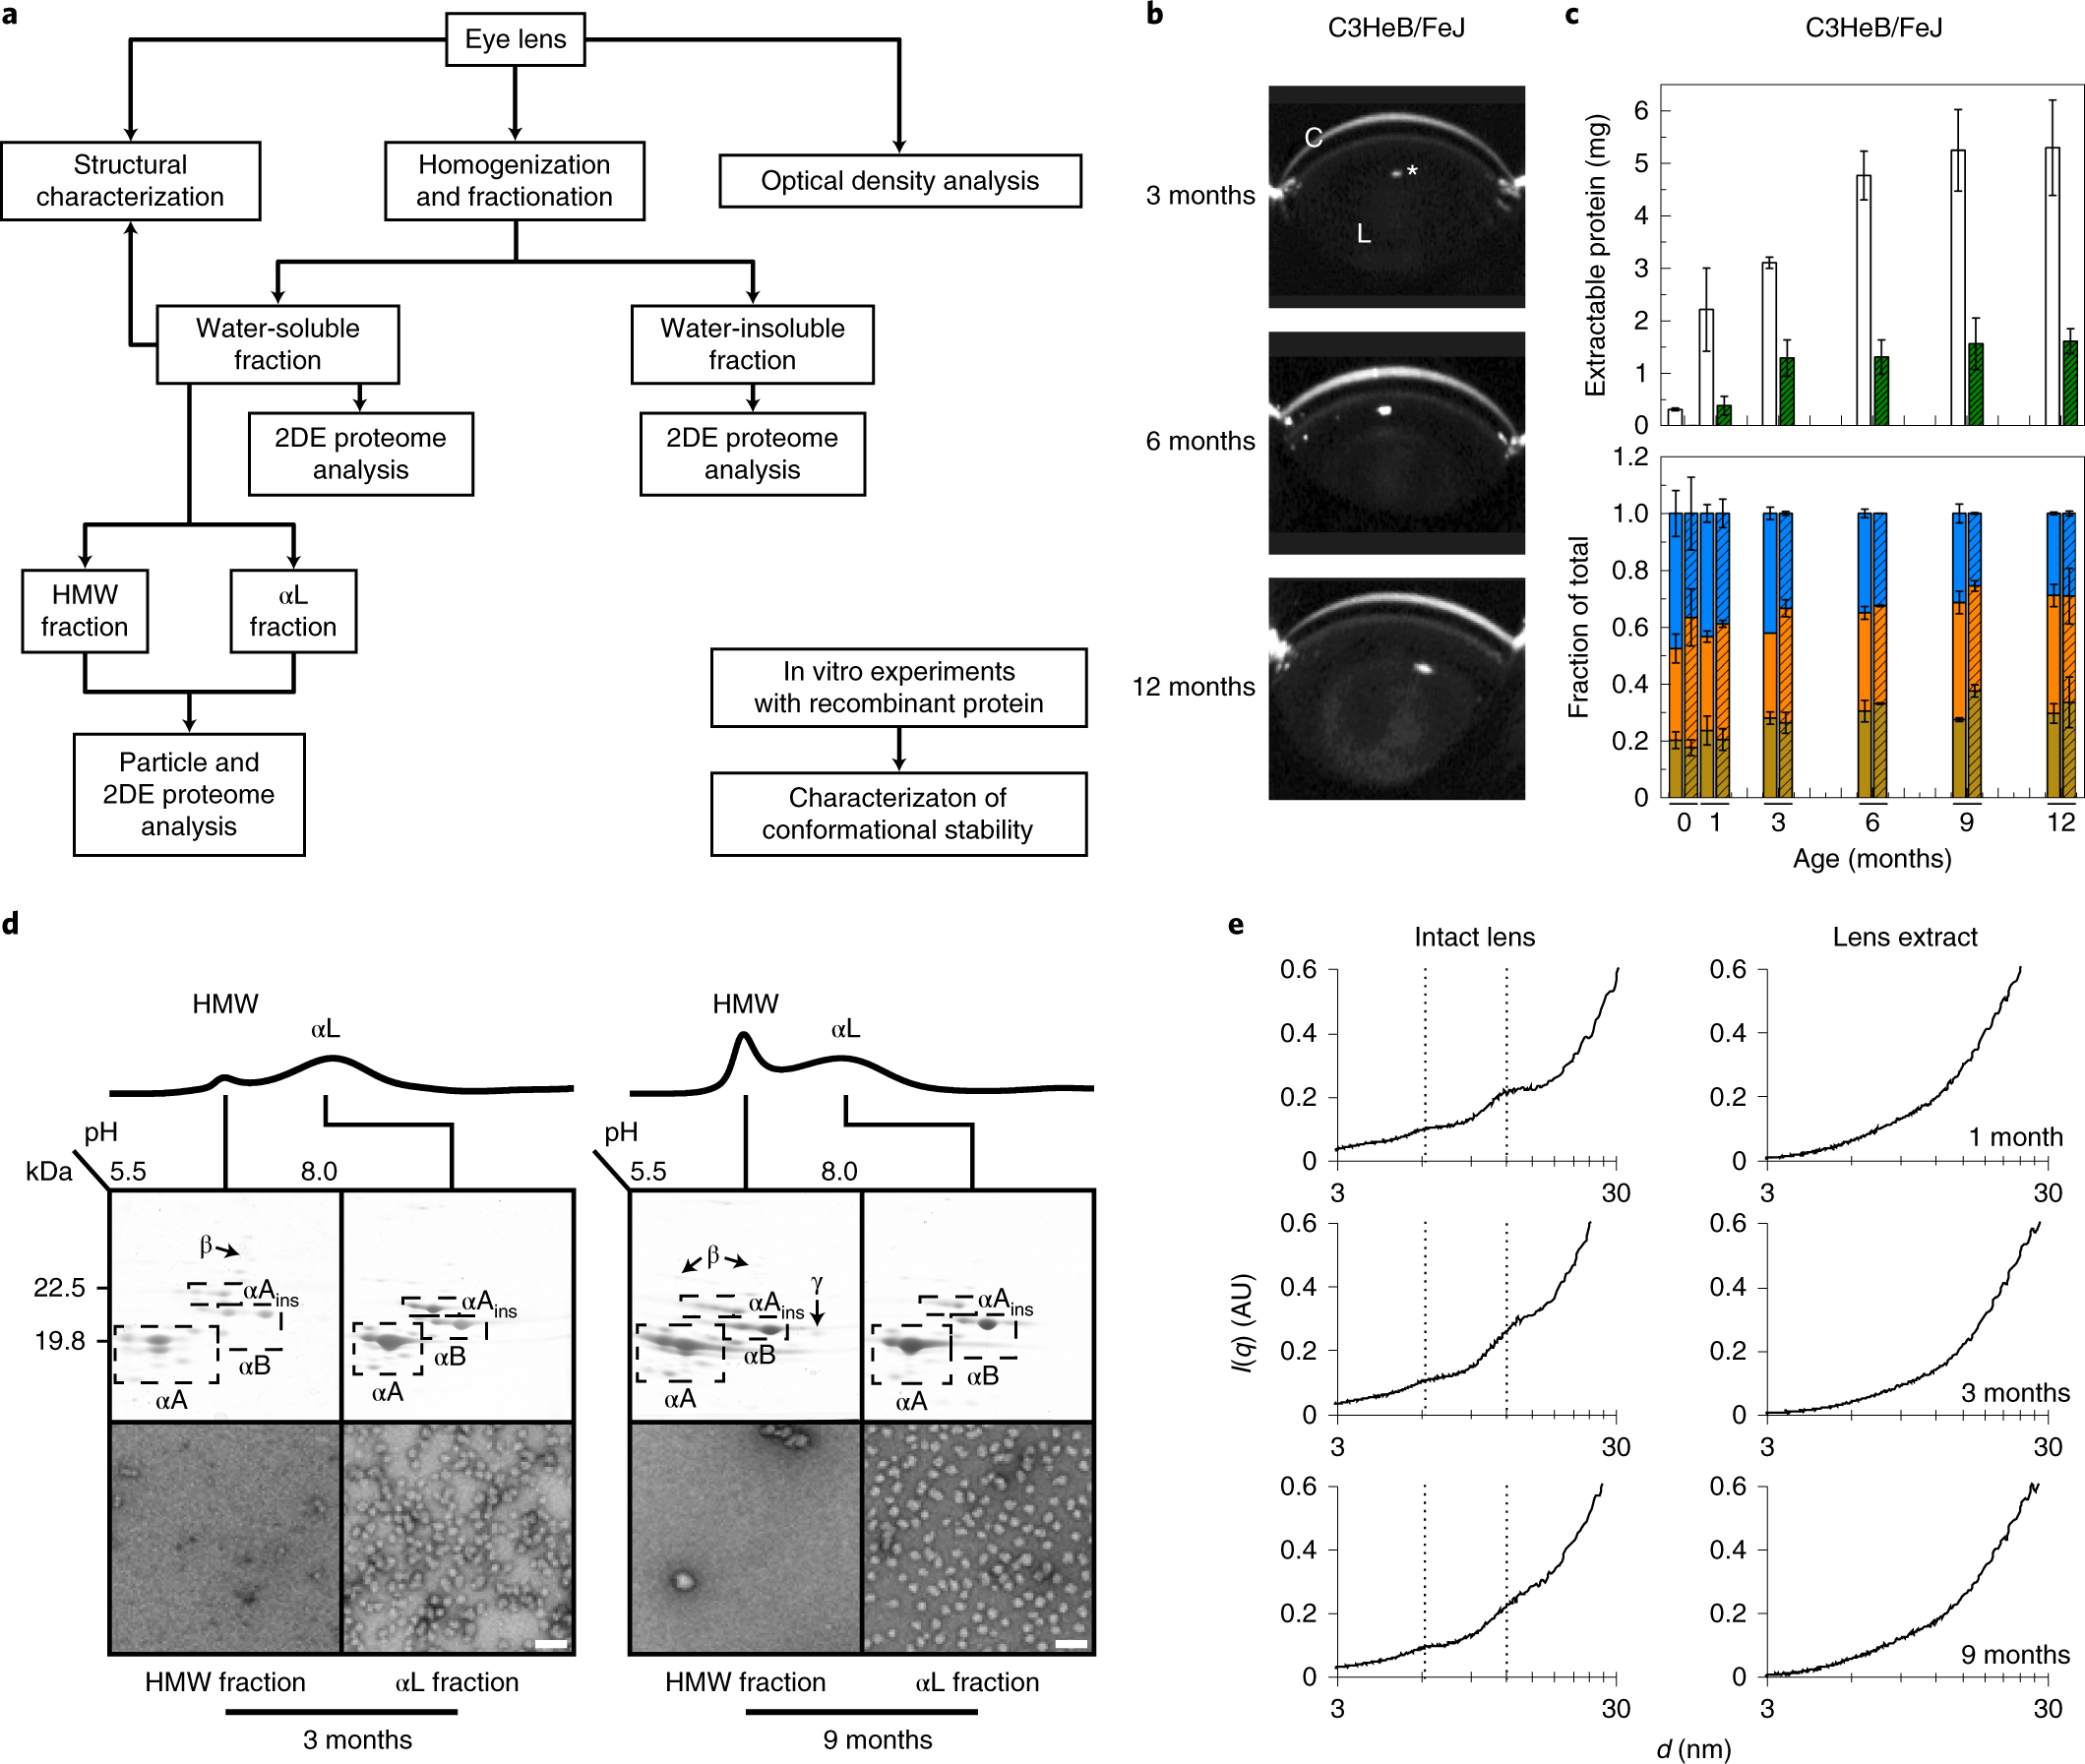 Eik Souvenir detectie Imbalances in the eye lens proteome are linked to cataract formation |  Nature Structural & Molecular Biology